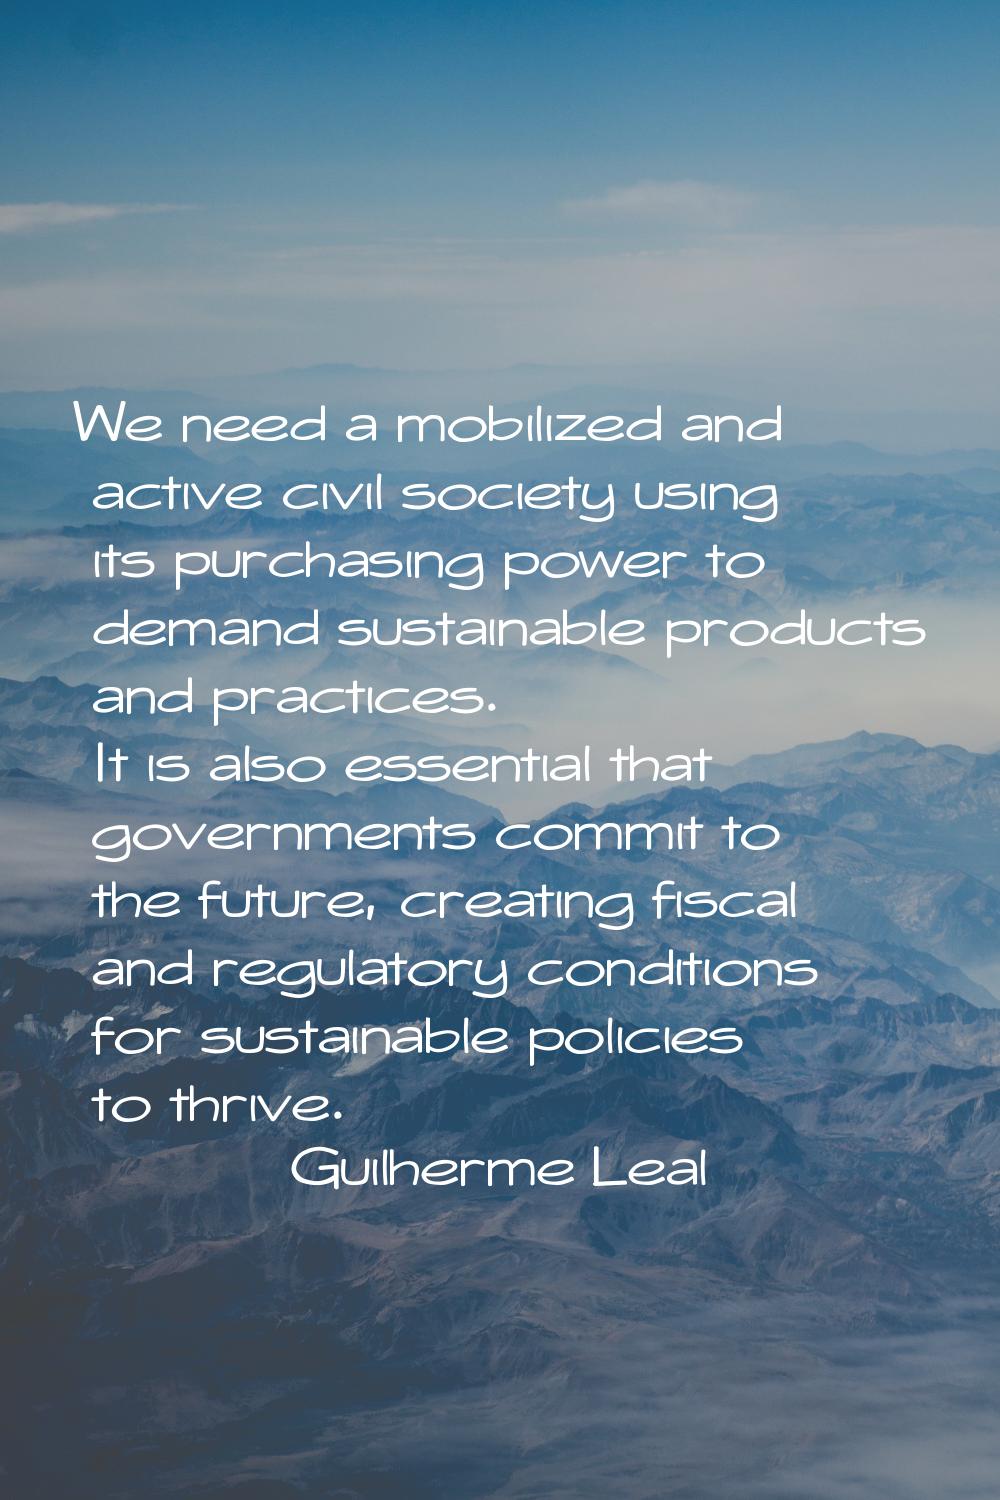 We need a mobilized and active civil society using its purchasing power to demand sustainable produ